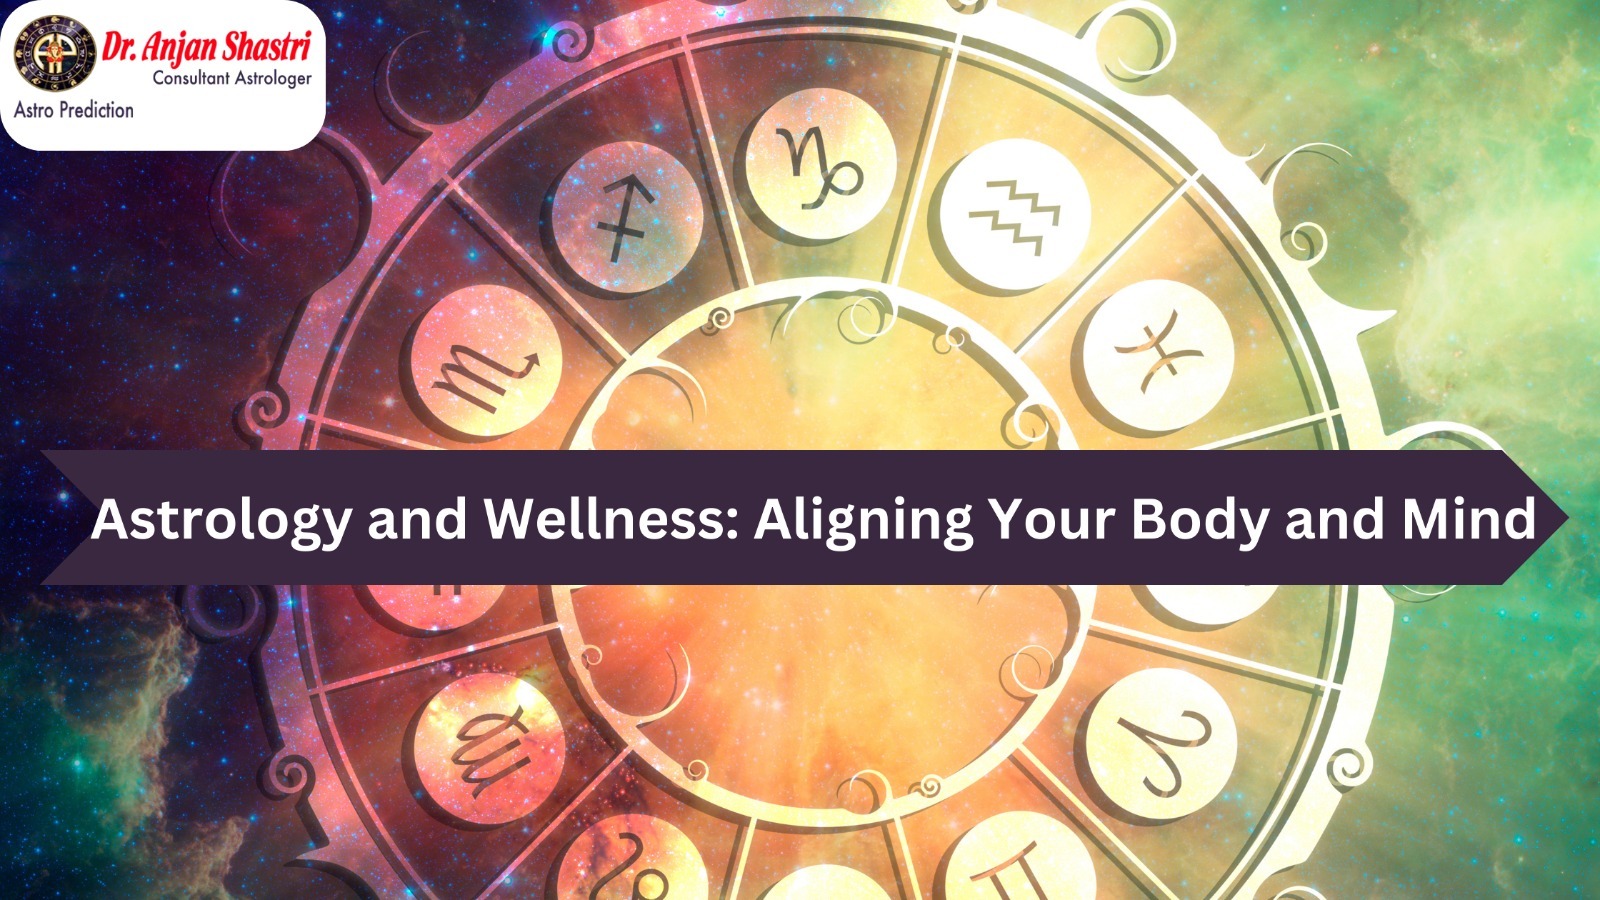 Astrology and Wellness: Aligning Your Body and Mind